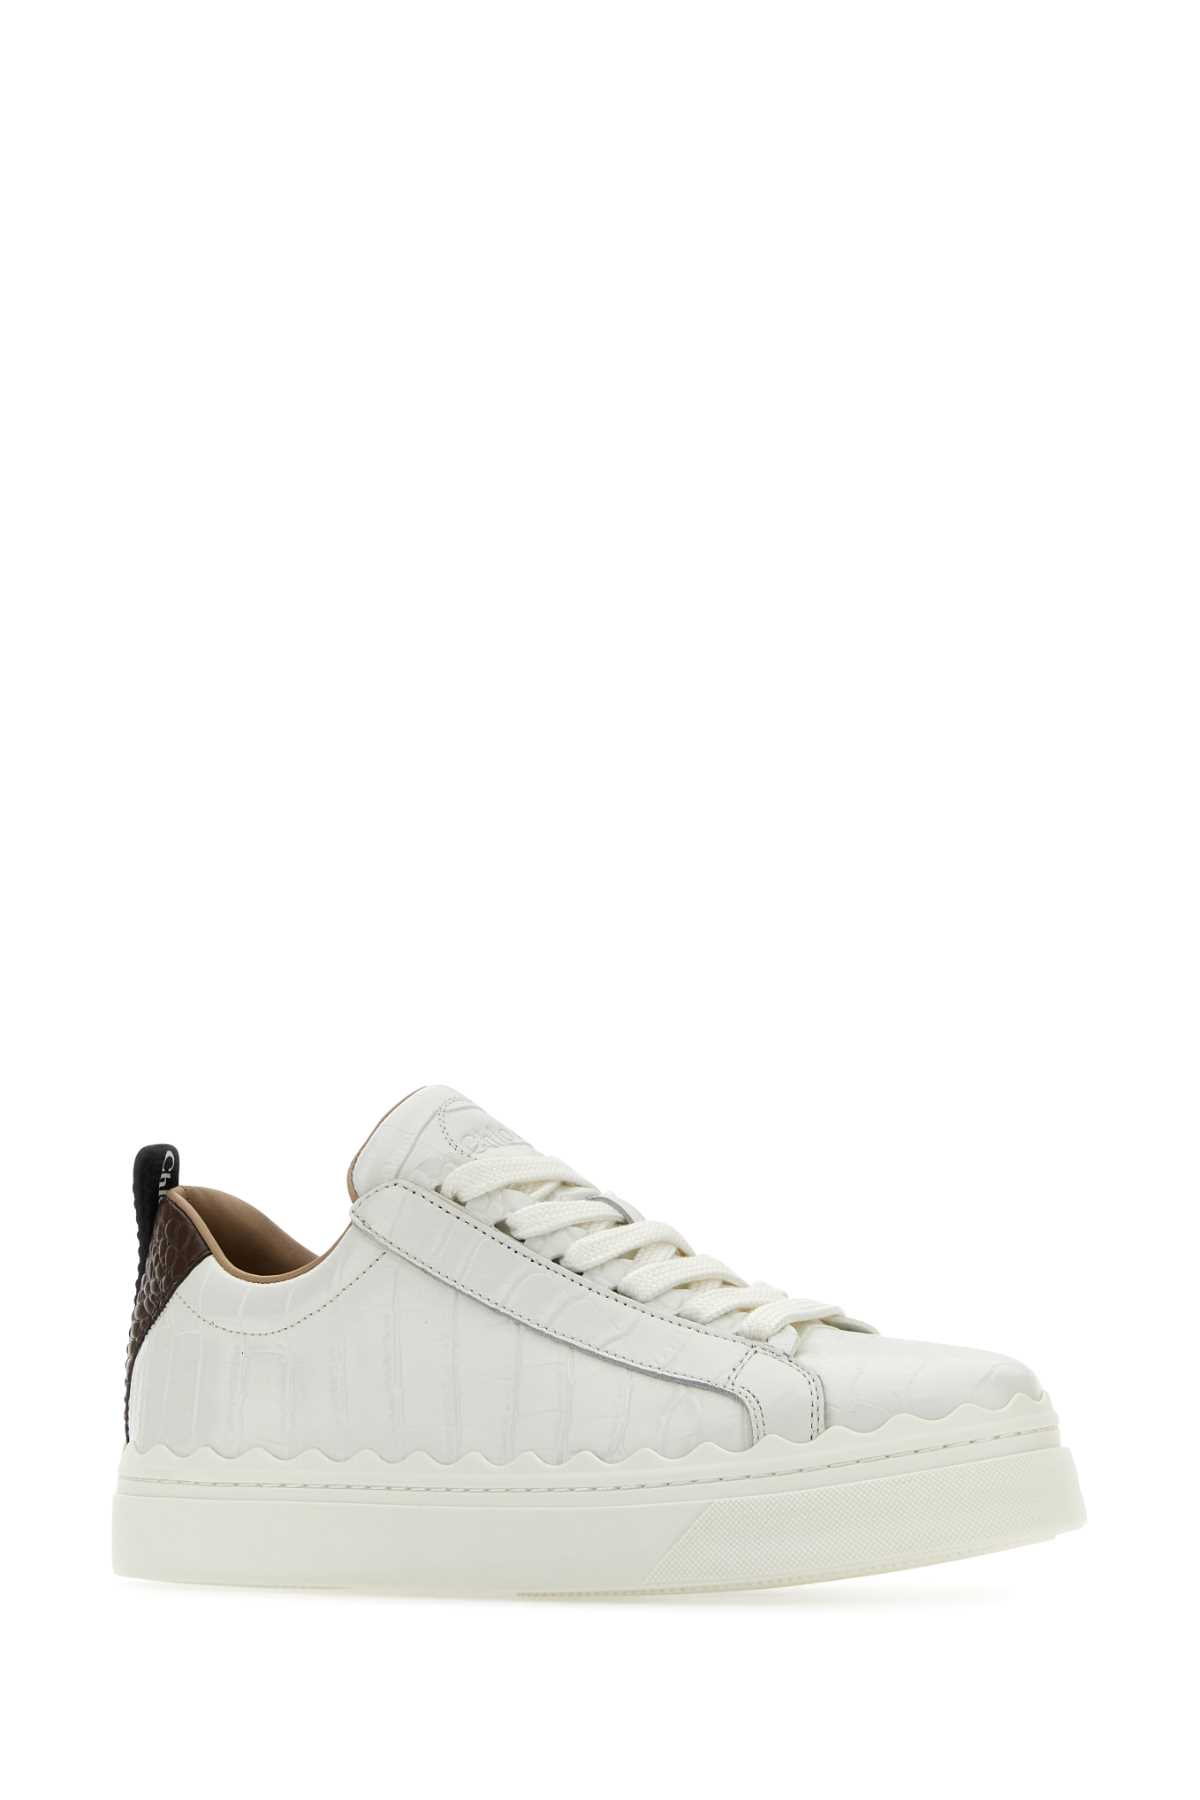 Chloé White Leather Trainers In Whitebrown1